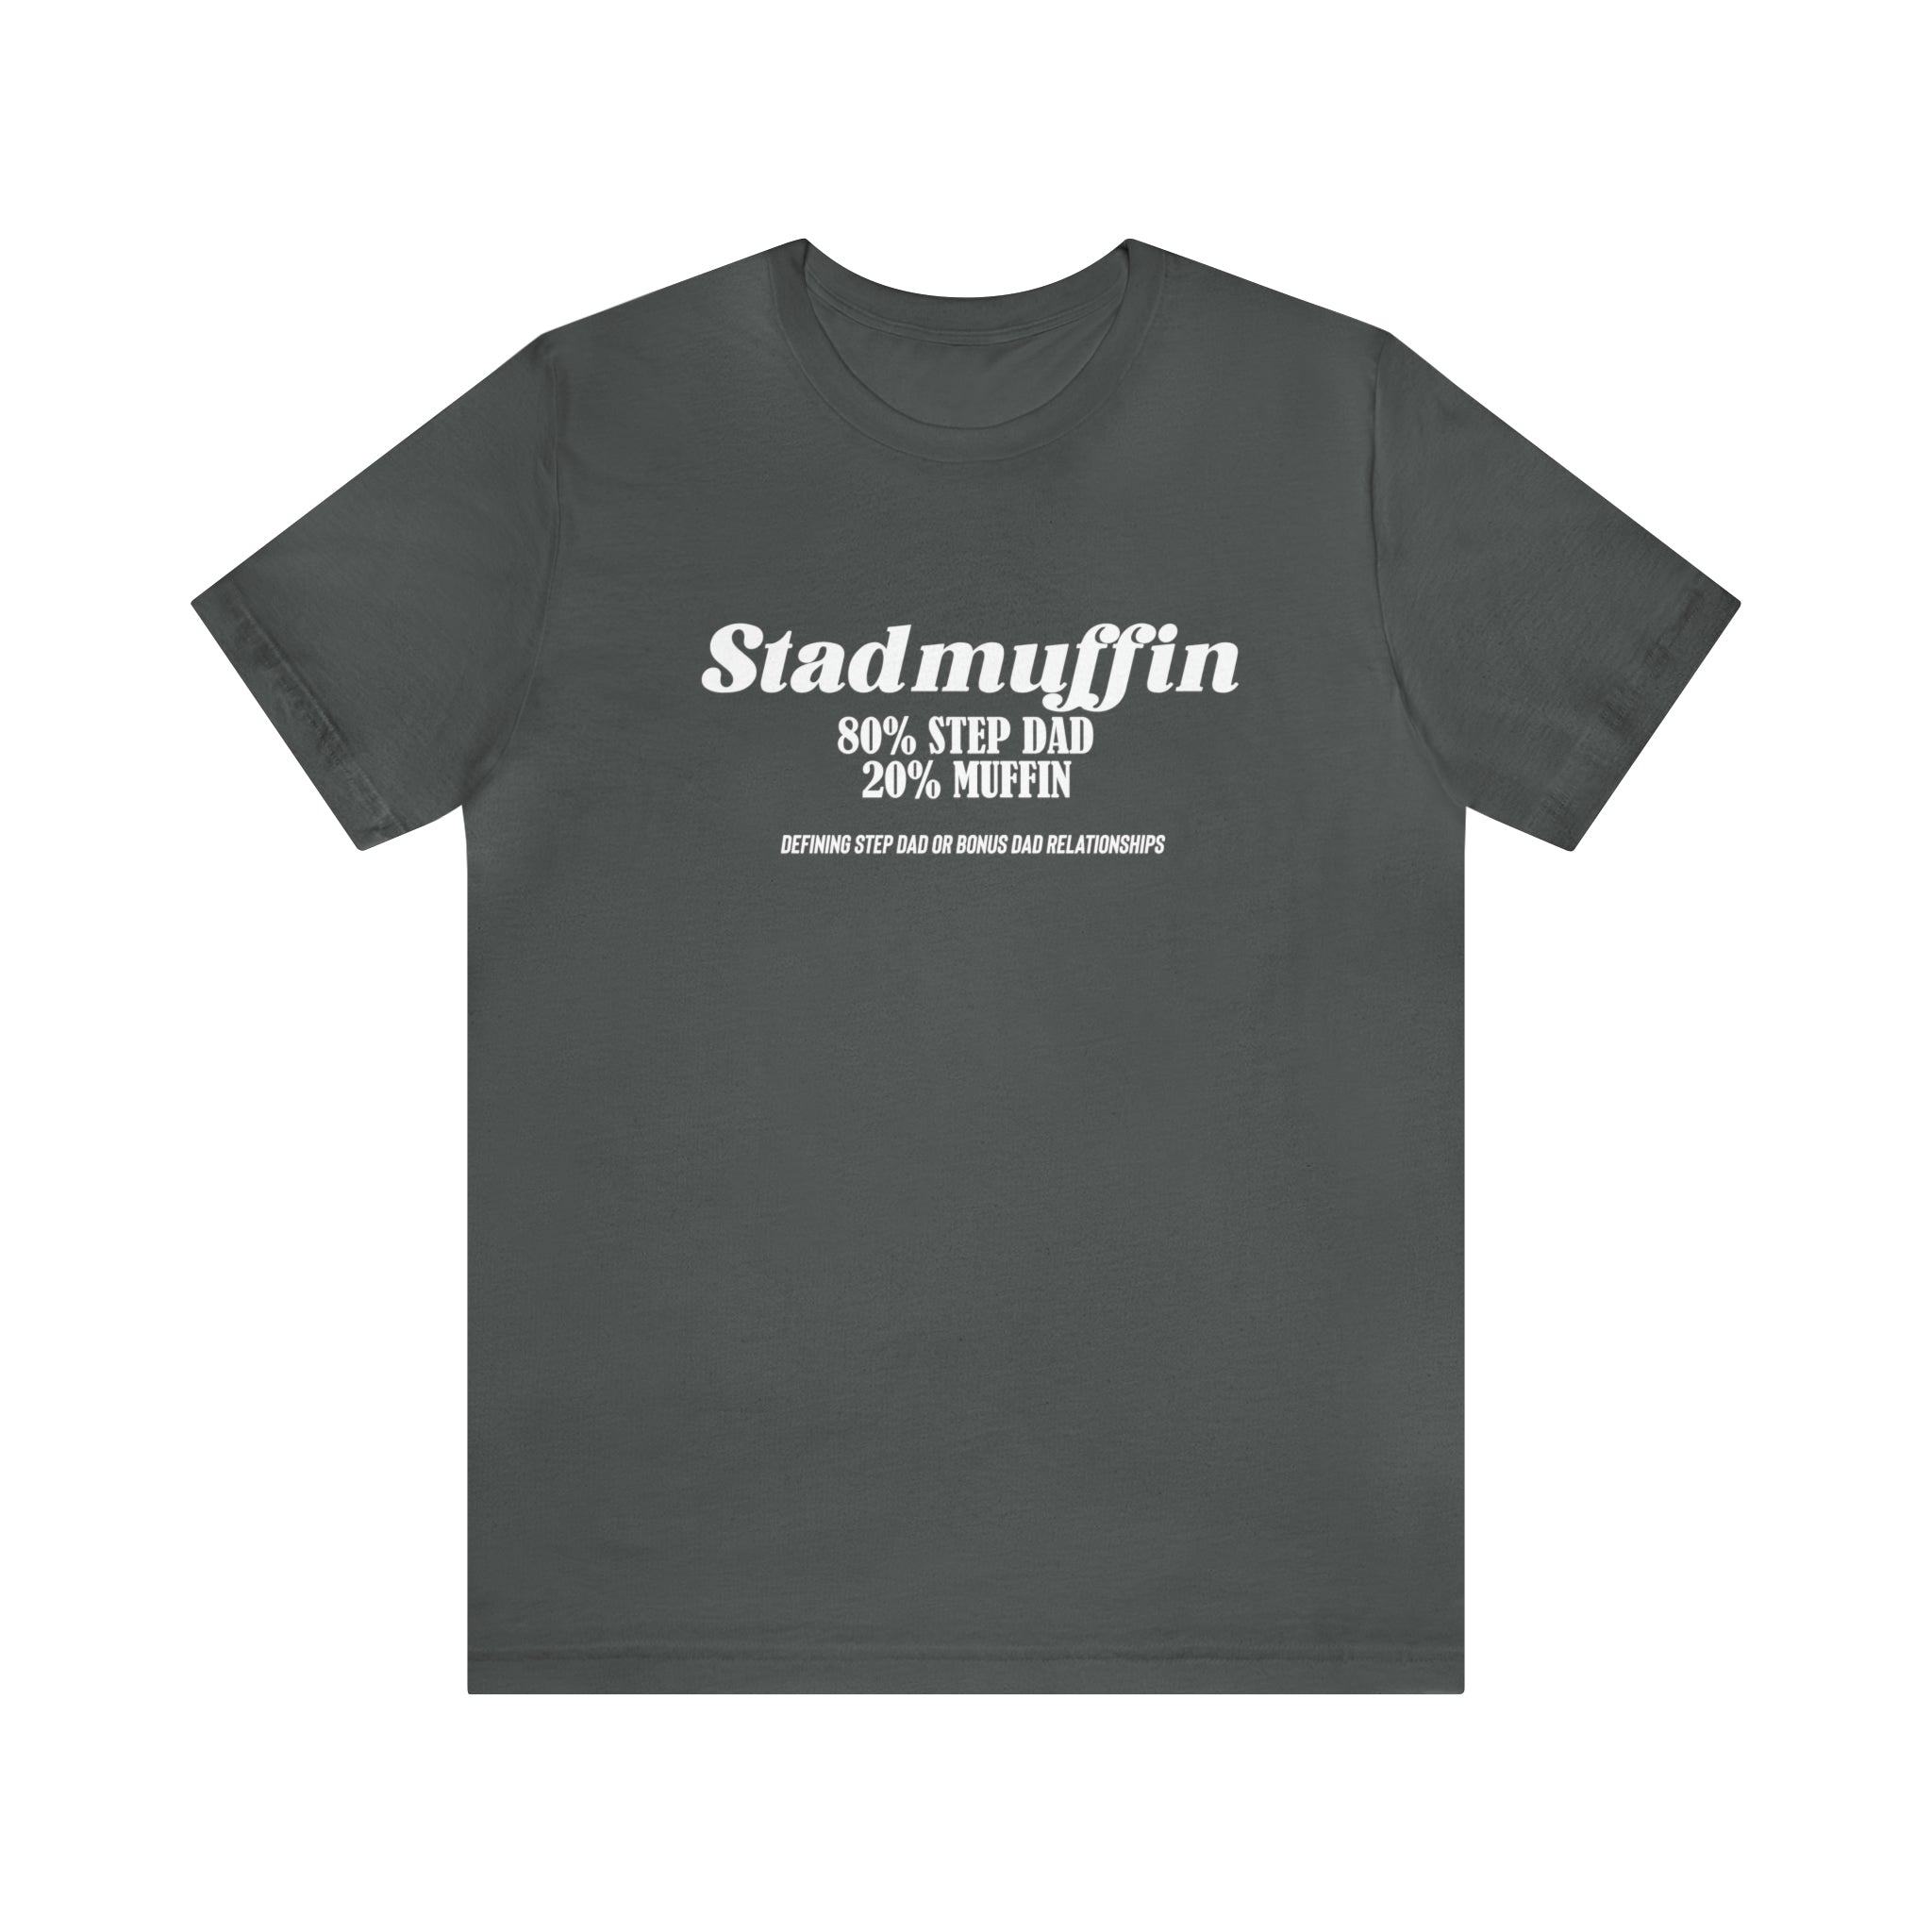 Fathers Day Gift Step Dad Unisex Softstyle T-Shirt Stad Muffin Step Dad